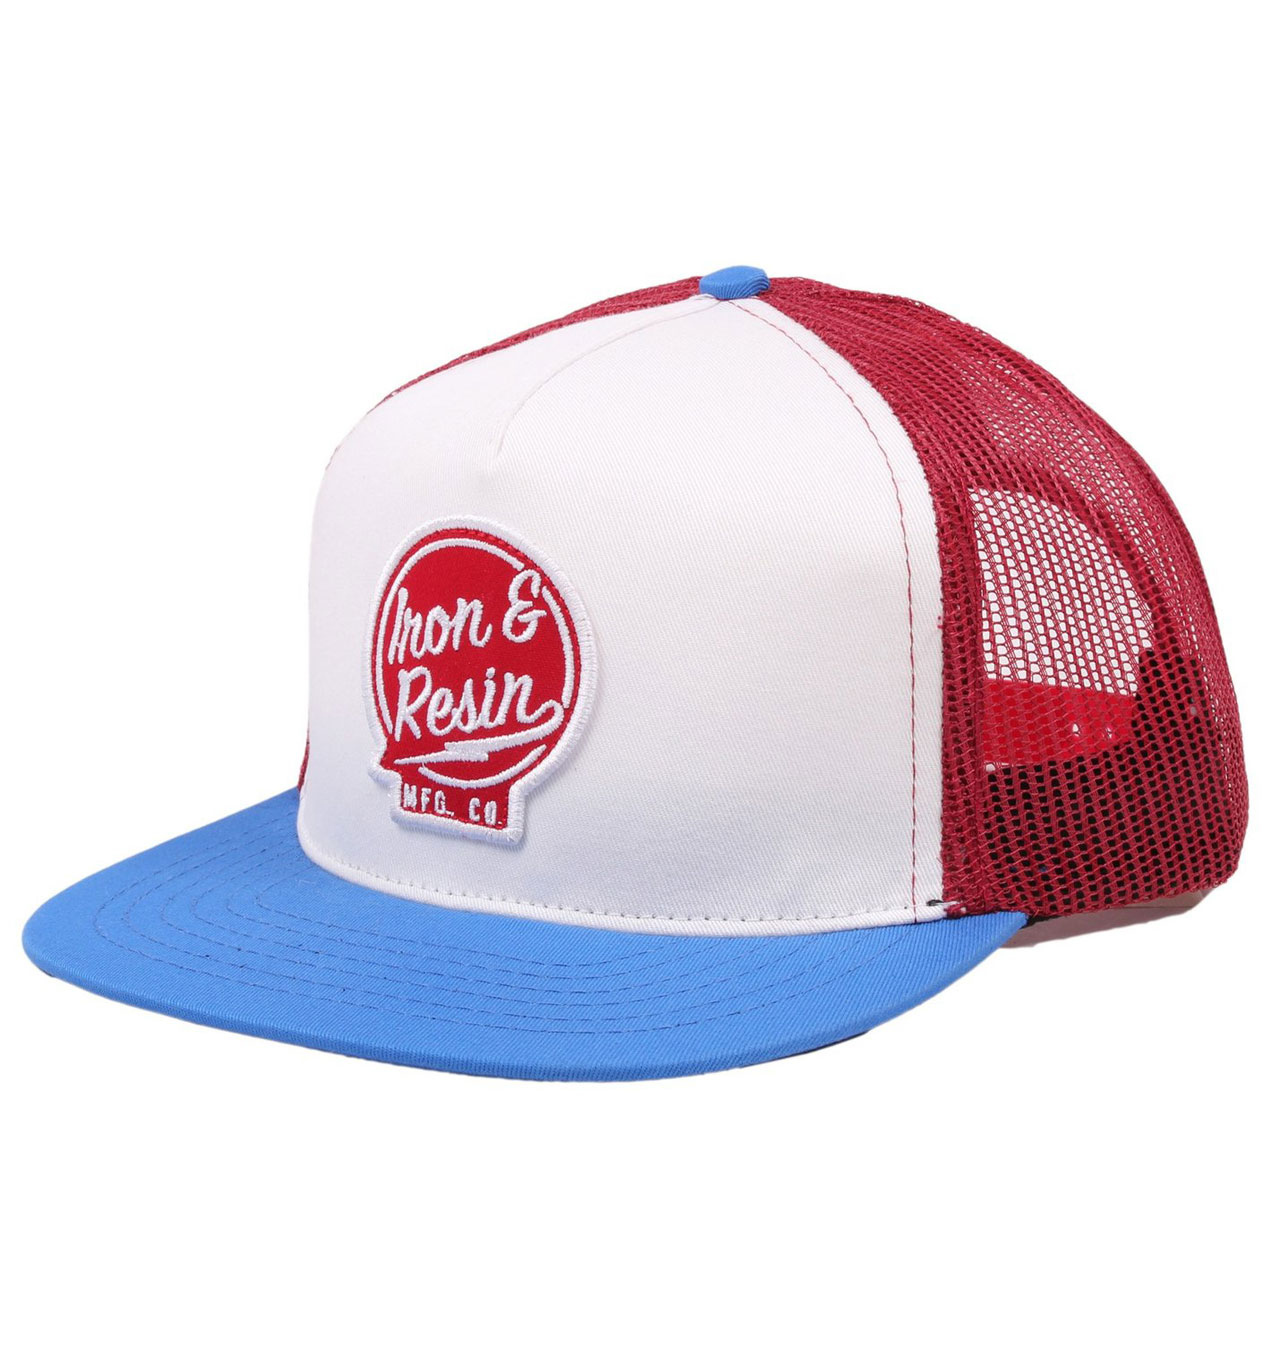 Iron & Resin - Sparky Mash Cap - Red/White/Blue